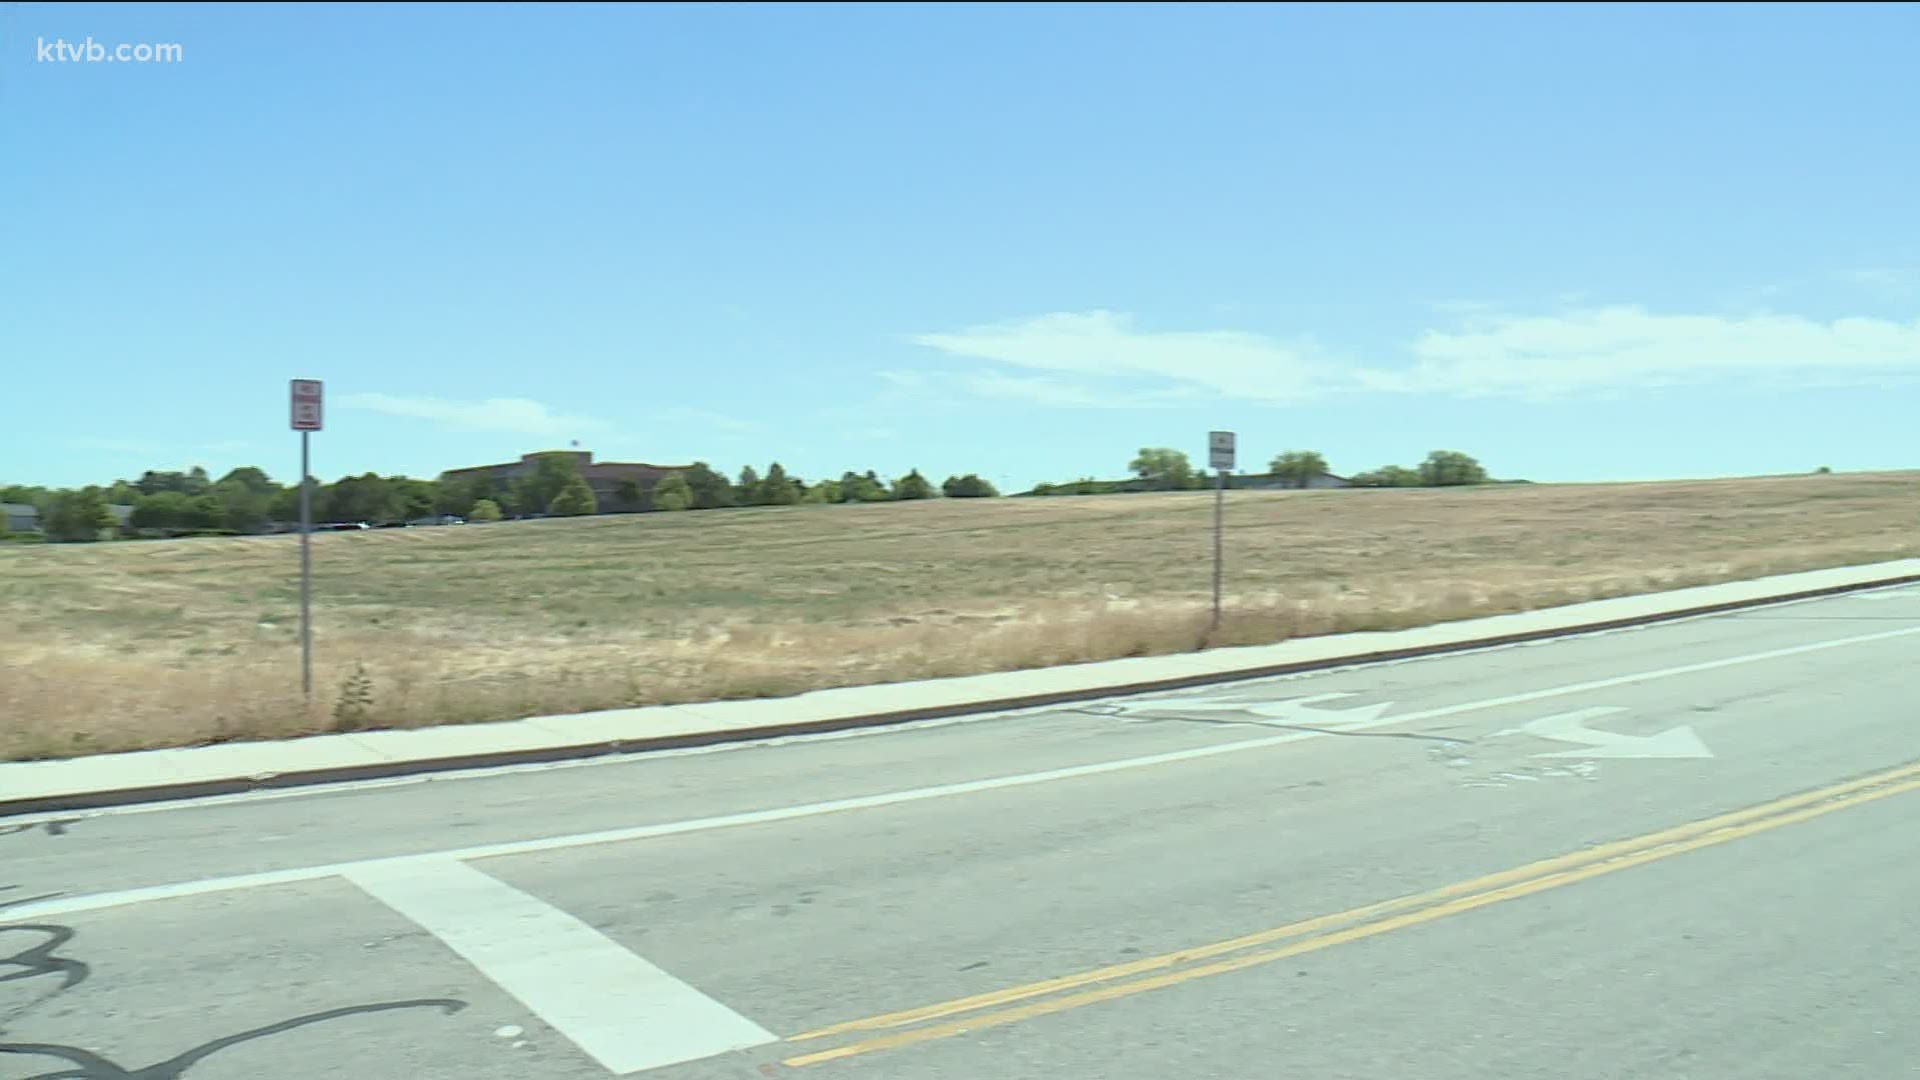 The city has sat on the property for decades and had no intent to develop it until a local developer offer swapping land in the Boise Foothills for the property.